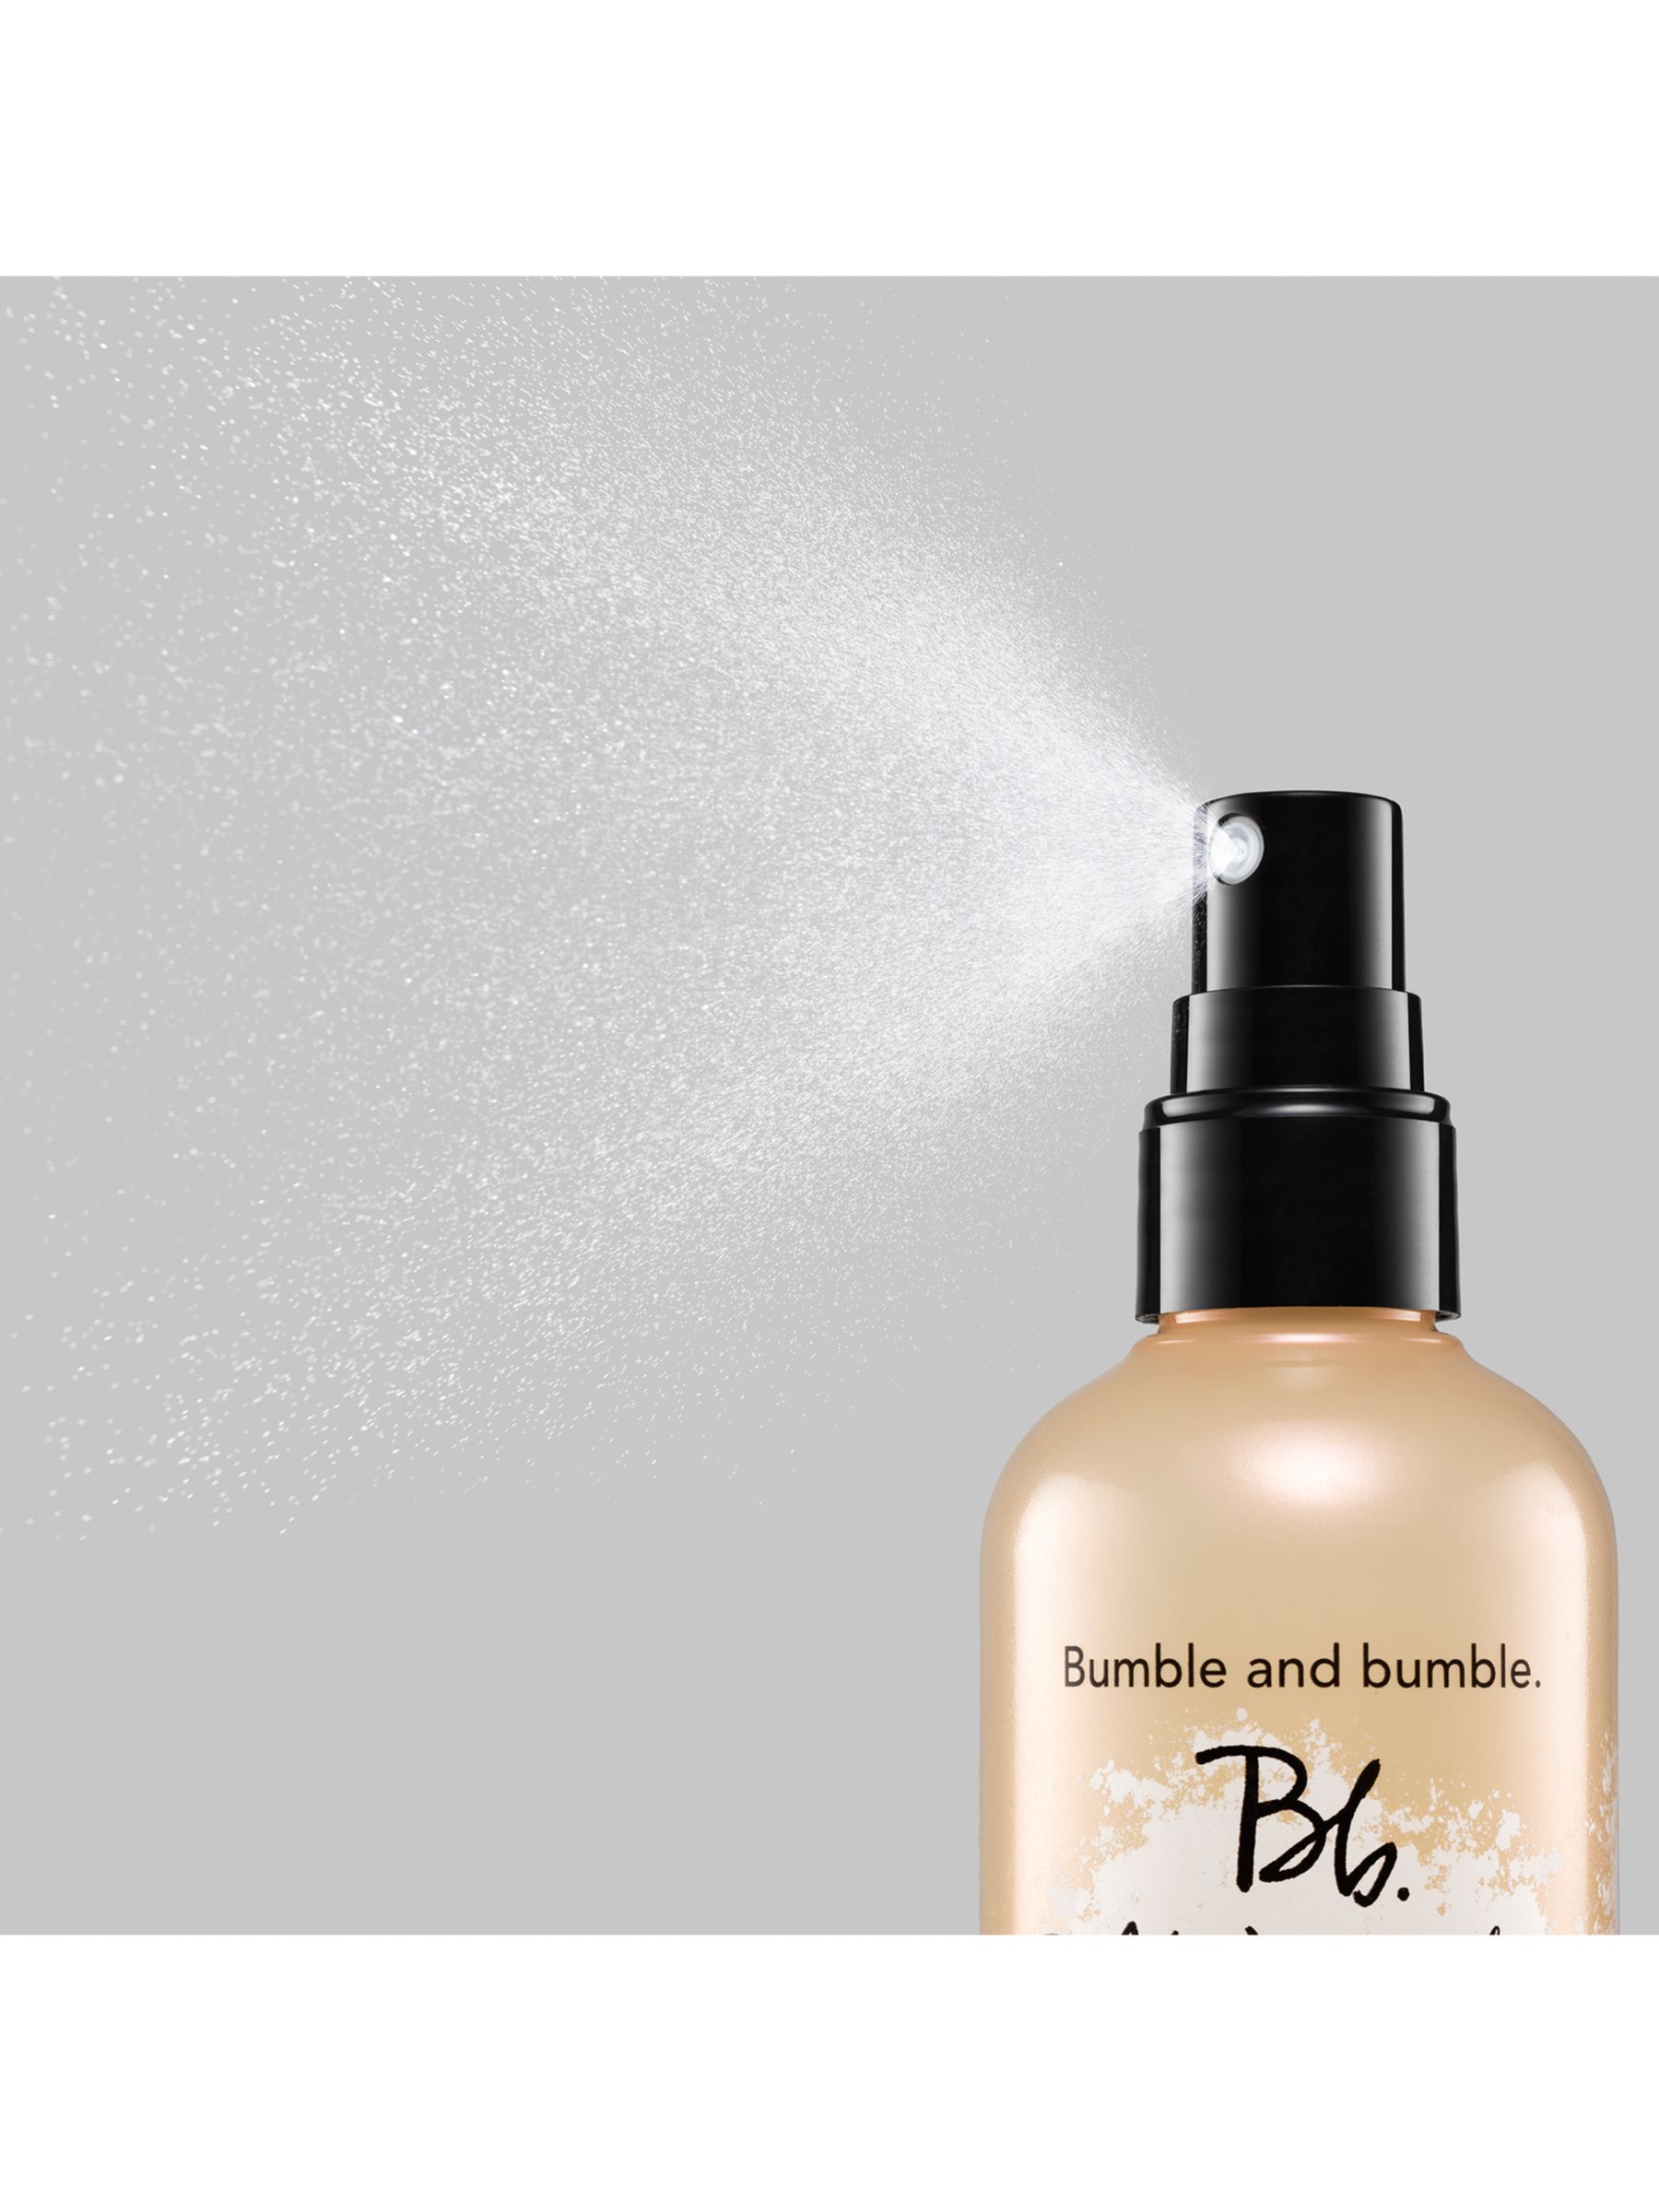 Bumble and bumble Pret A Powder Post Workout Dry Shampoo Mist, 120ml 2